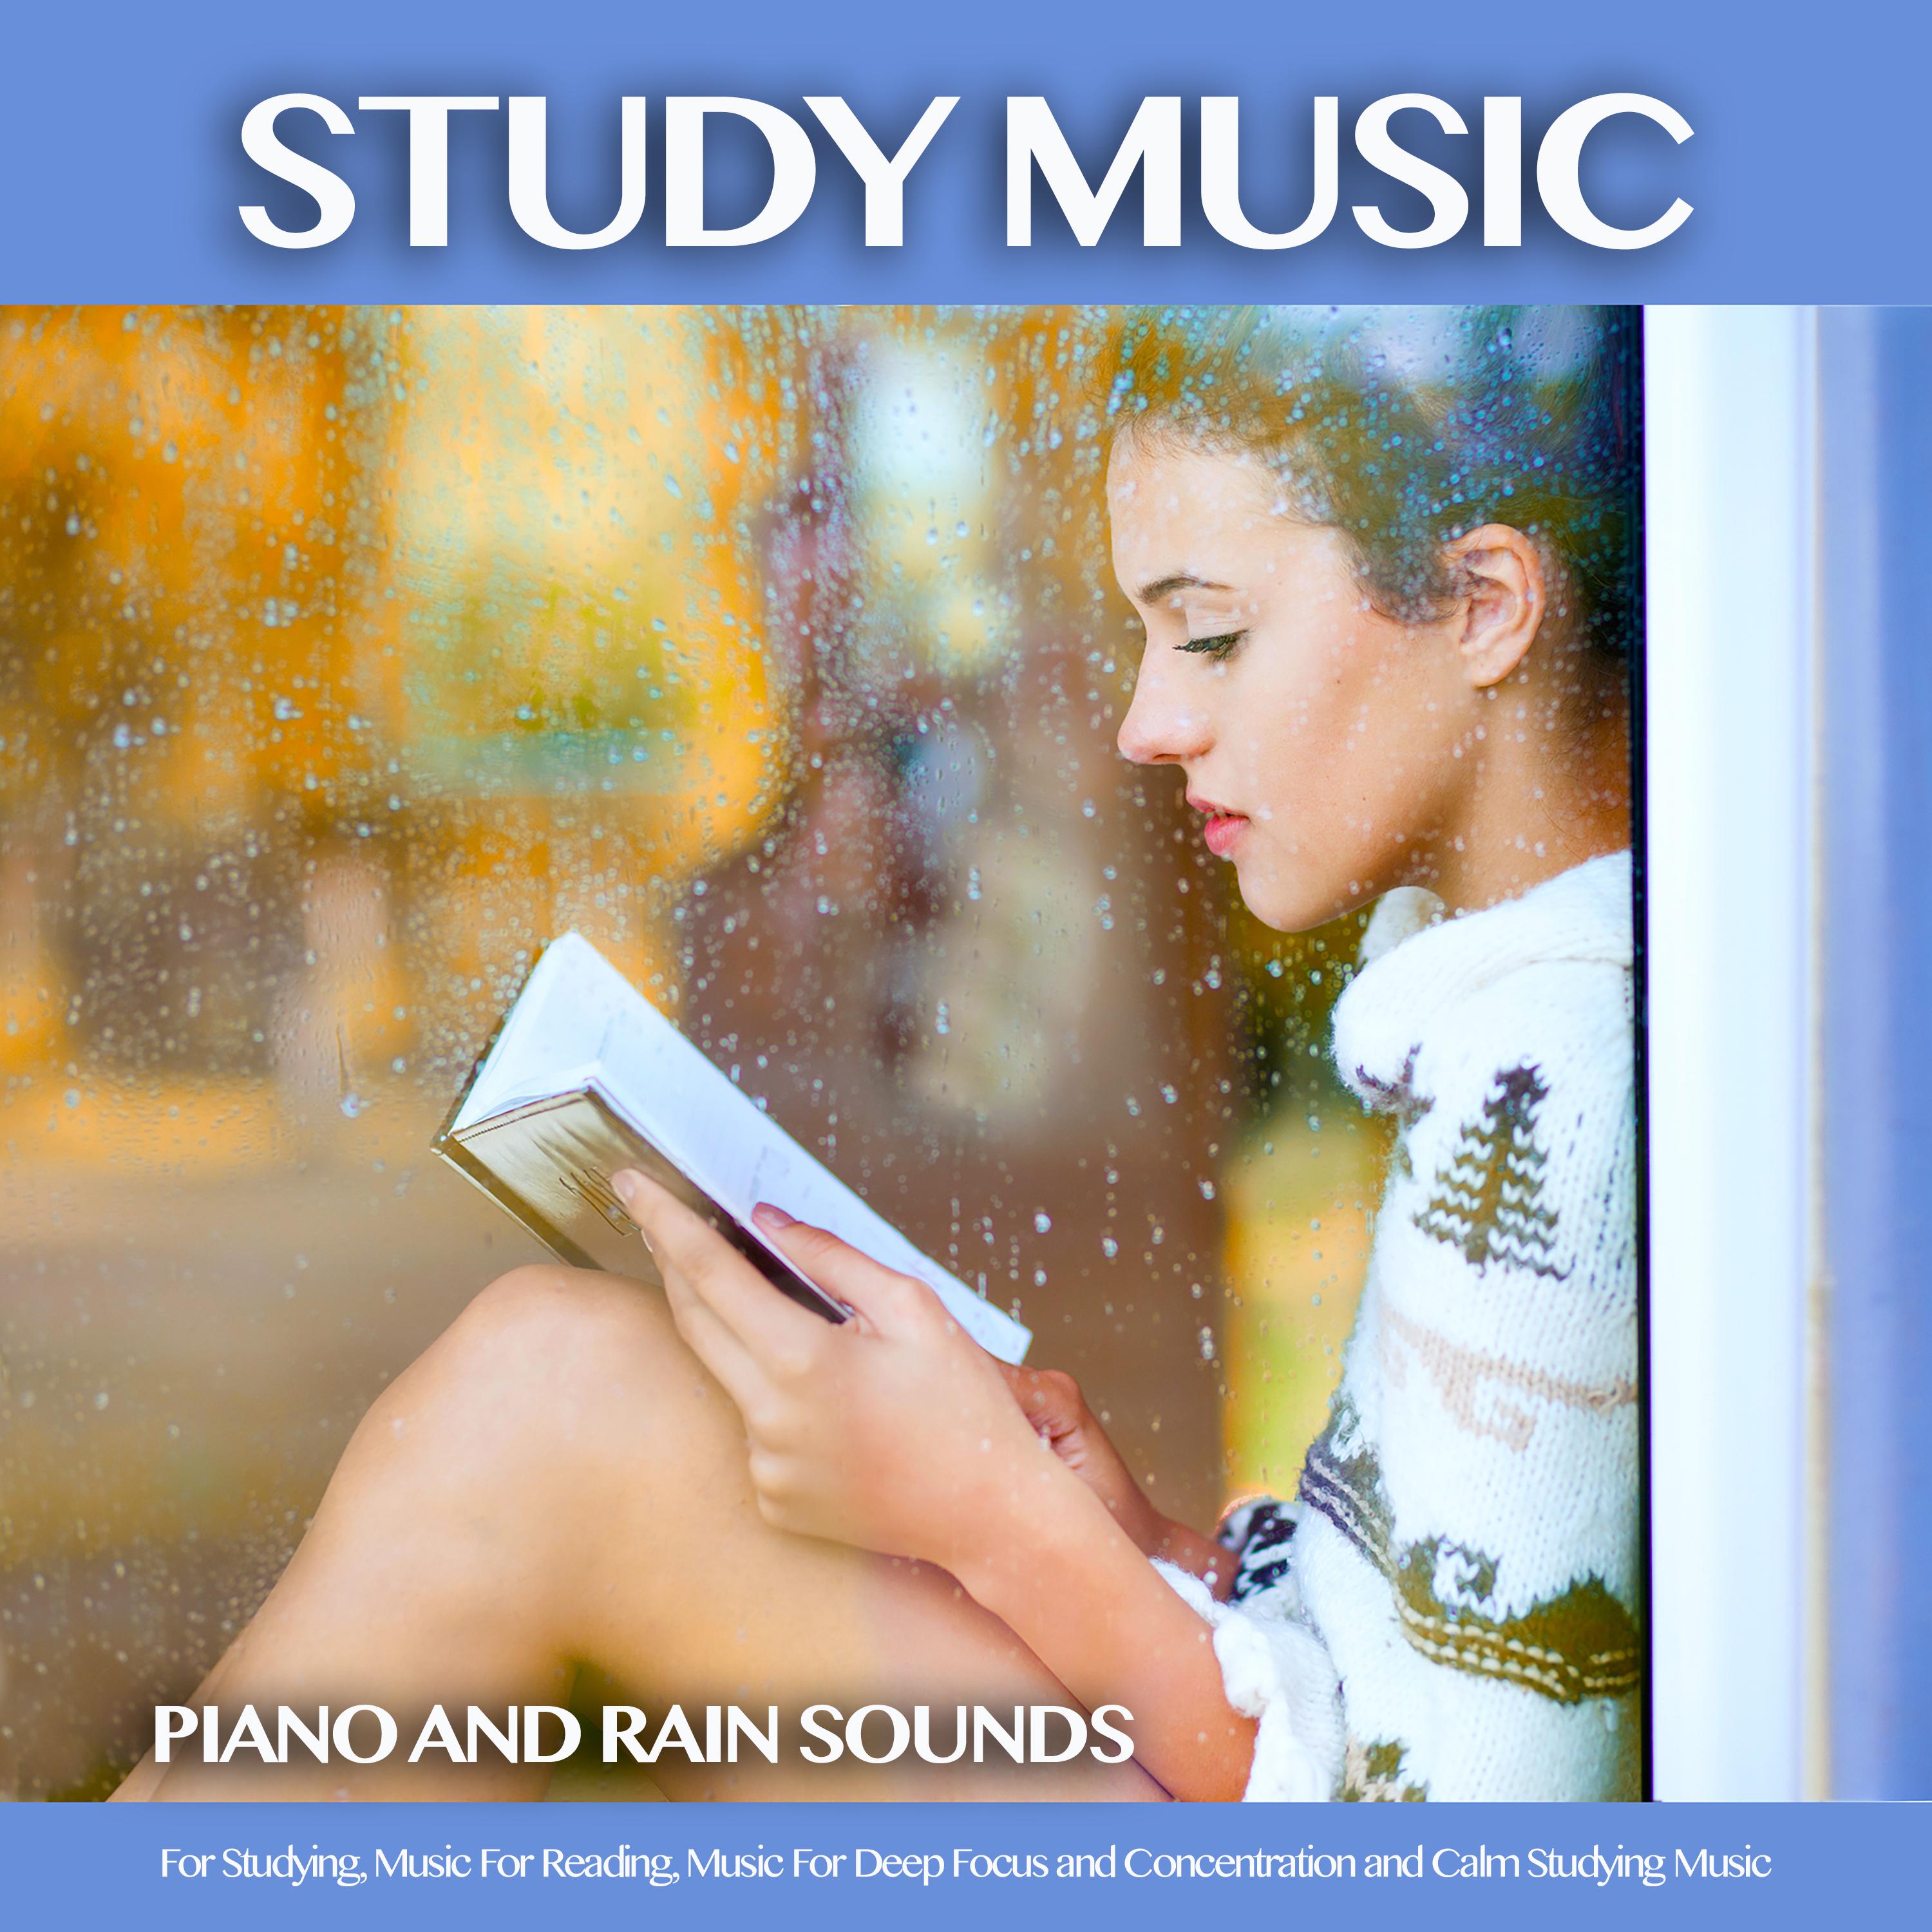 Sounds of Rain and Music For Concentration